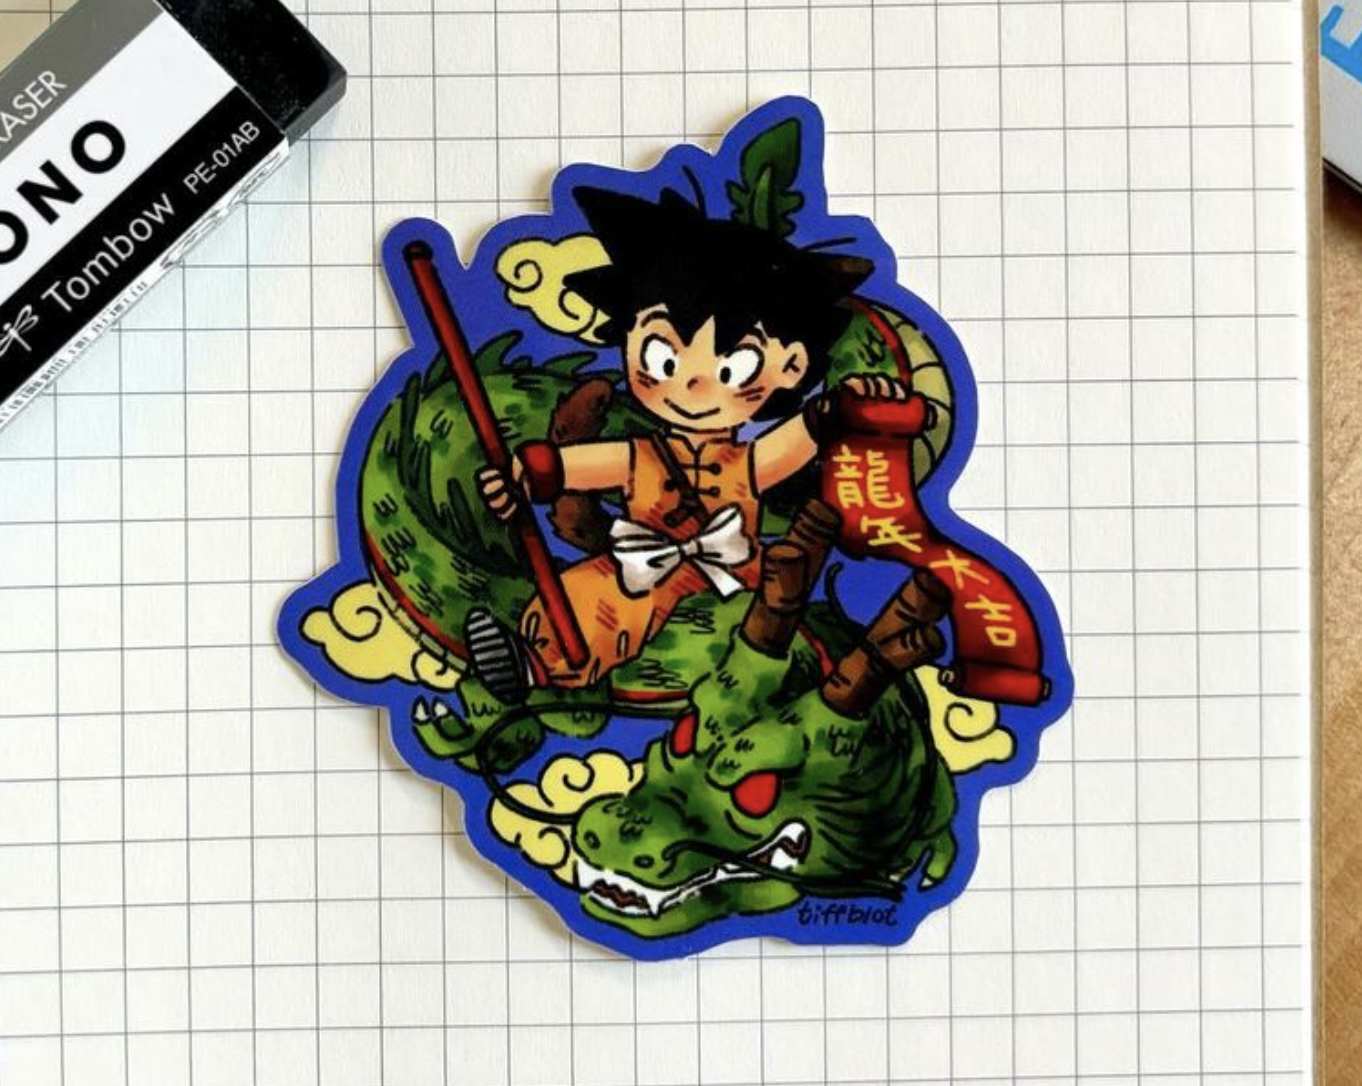 &quot;Goku-inspired sticker with Shenlong&quot; sitting on graph paper.